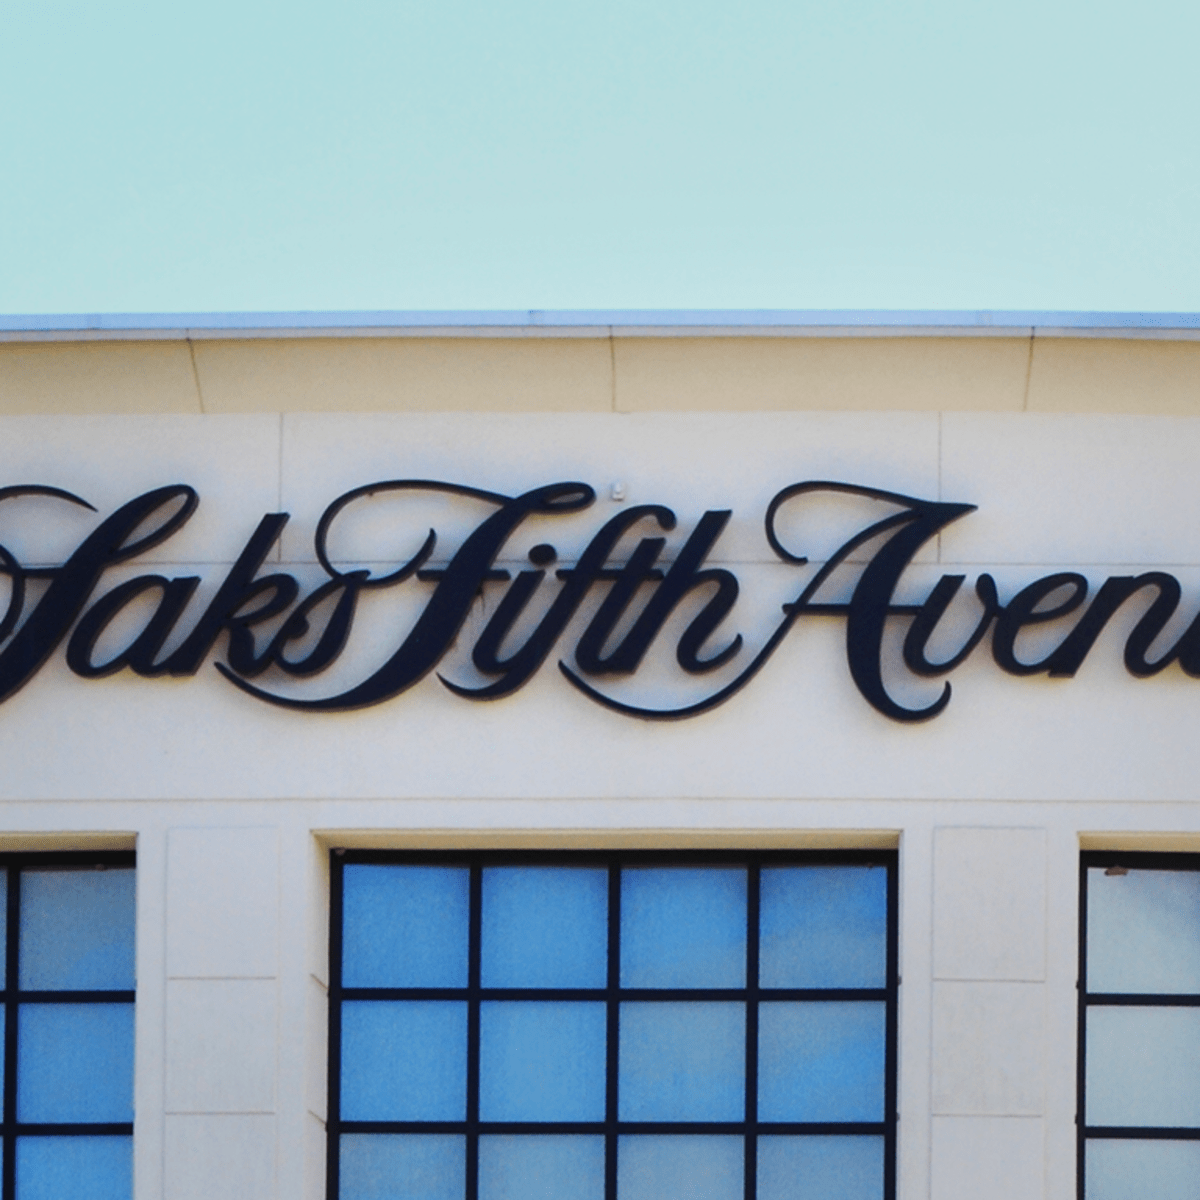 See what a casino atop Saks Fifth Avenue could look like